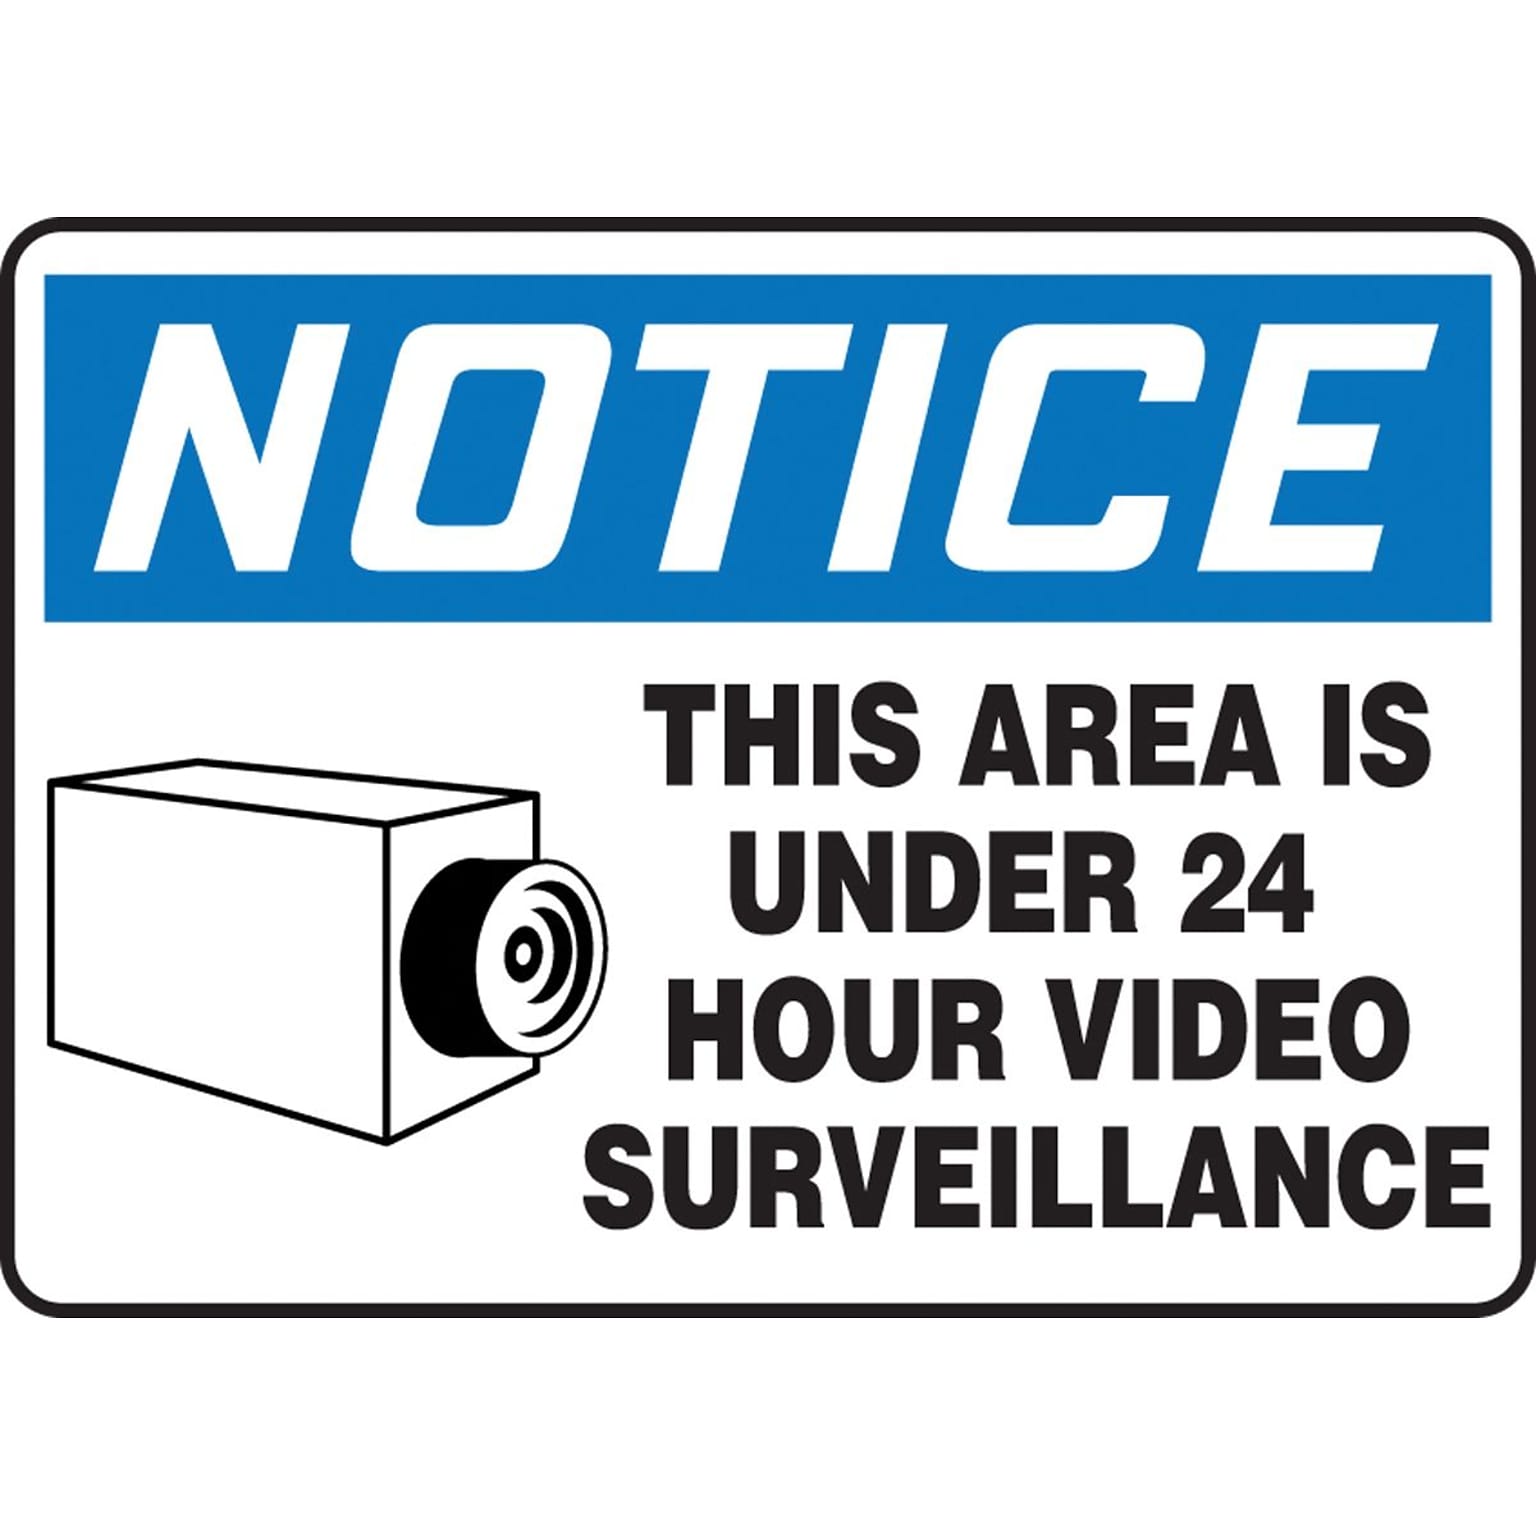 Accuform 10 x 14 Aluminum Safety Sign NOTICE THIS AREA IS..W/GRAPHIC, Blue/Black On White (MASE807VA)